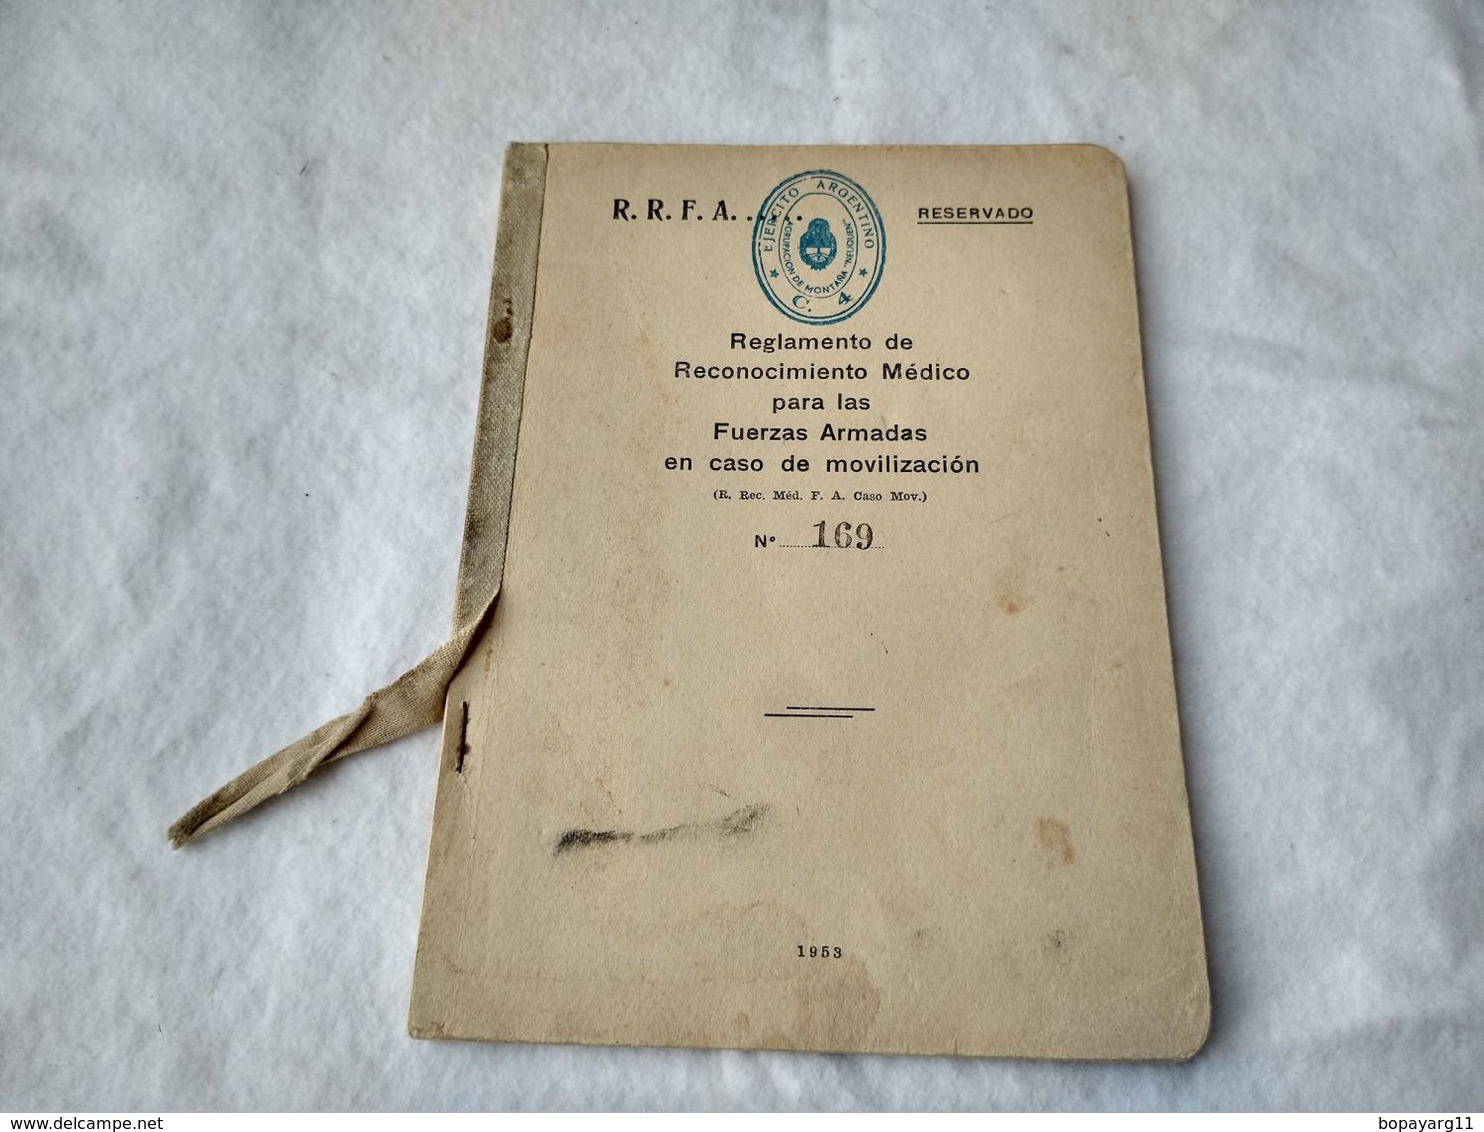 Argentina Argentine Army Classified Medical Selection Procedures 1953 Book #13 - Spagnolo